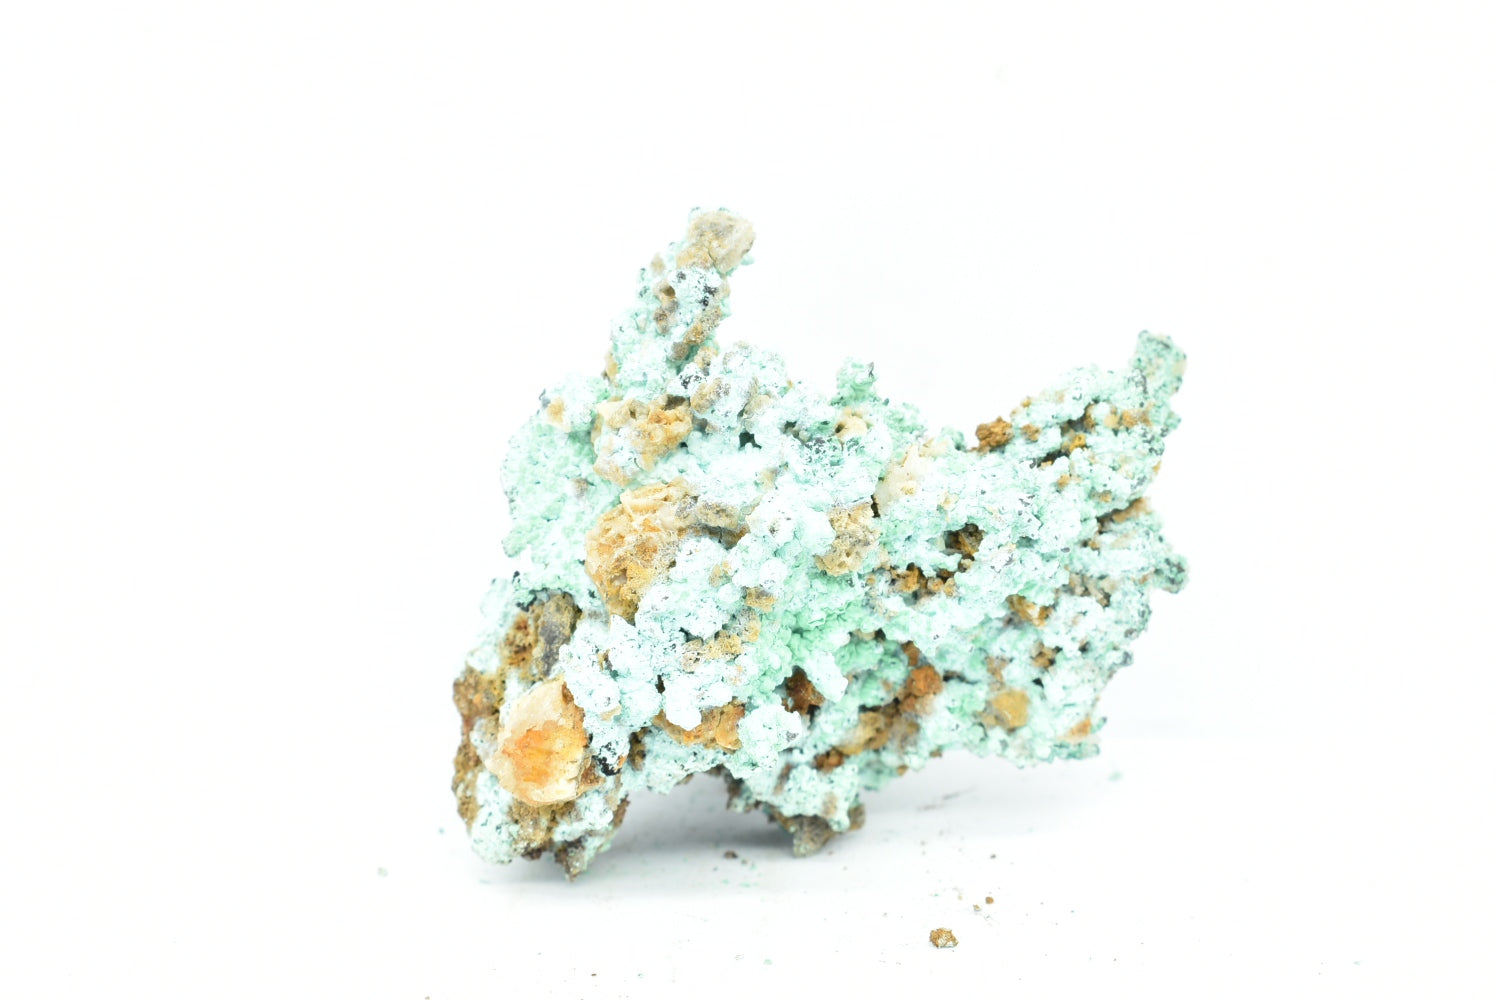 Copper with green oxidation